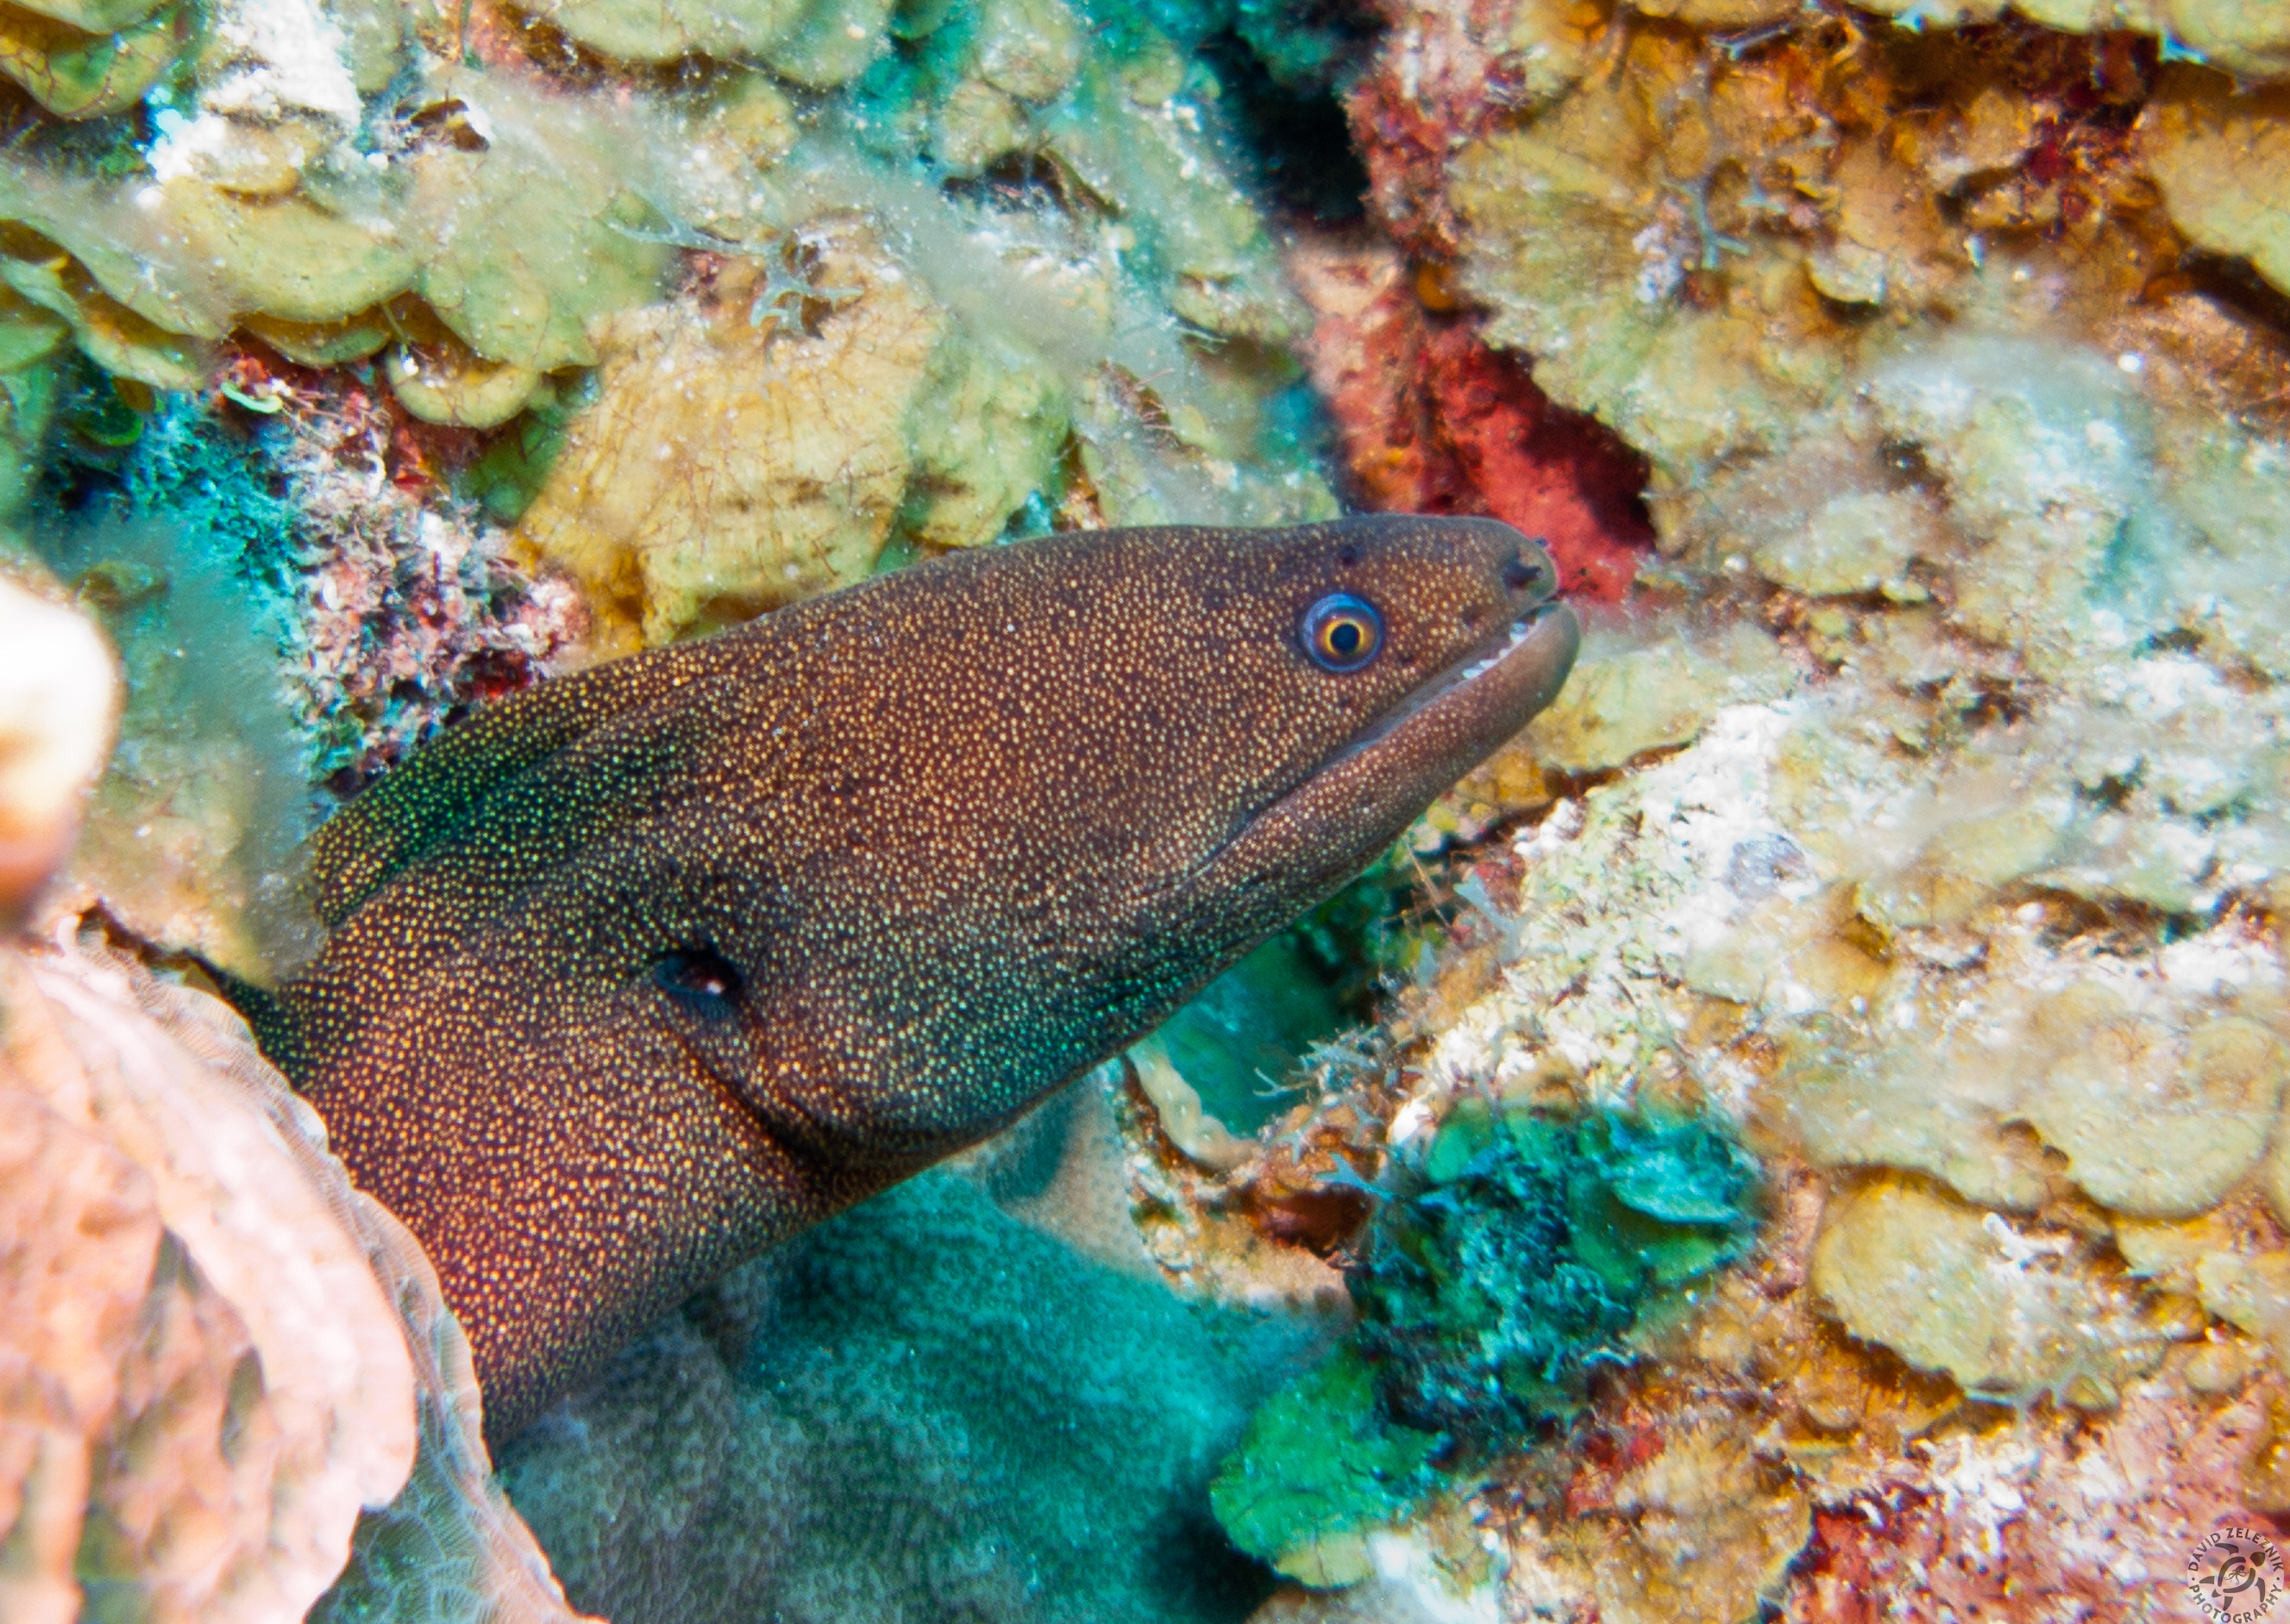 A Goldentail Moray, note the yellow spots and the yellow ring surrounding the iris